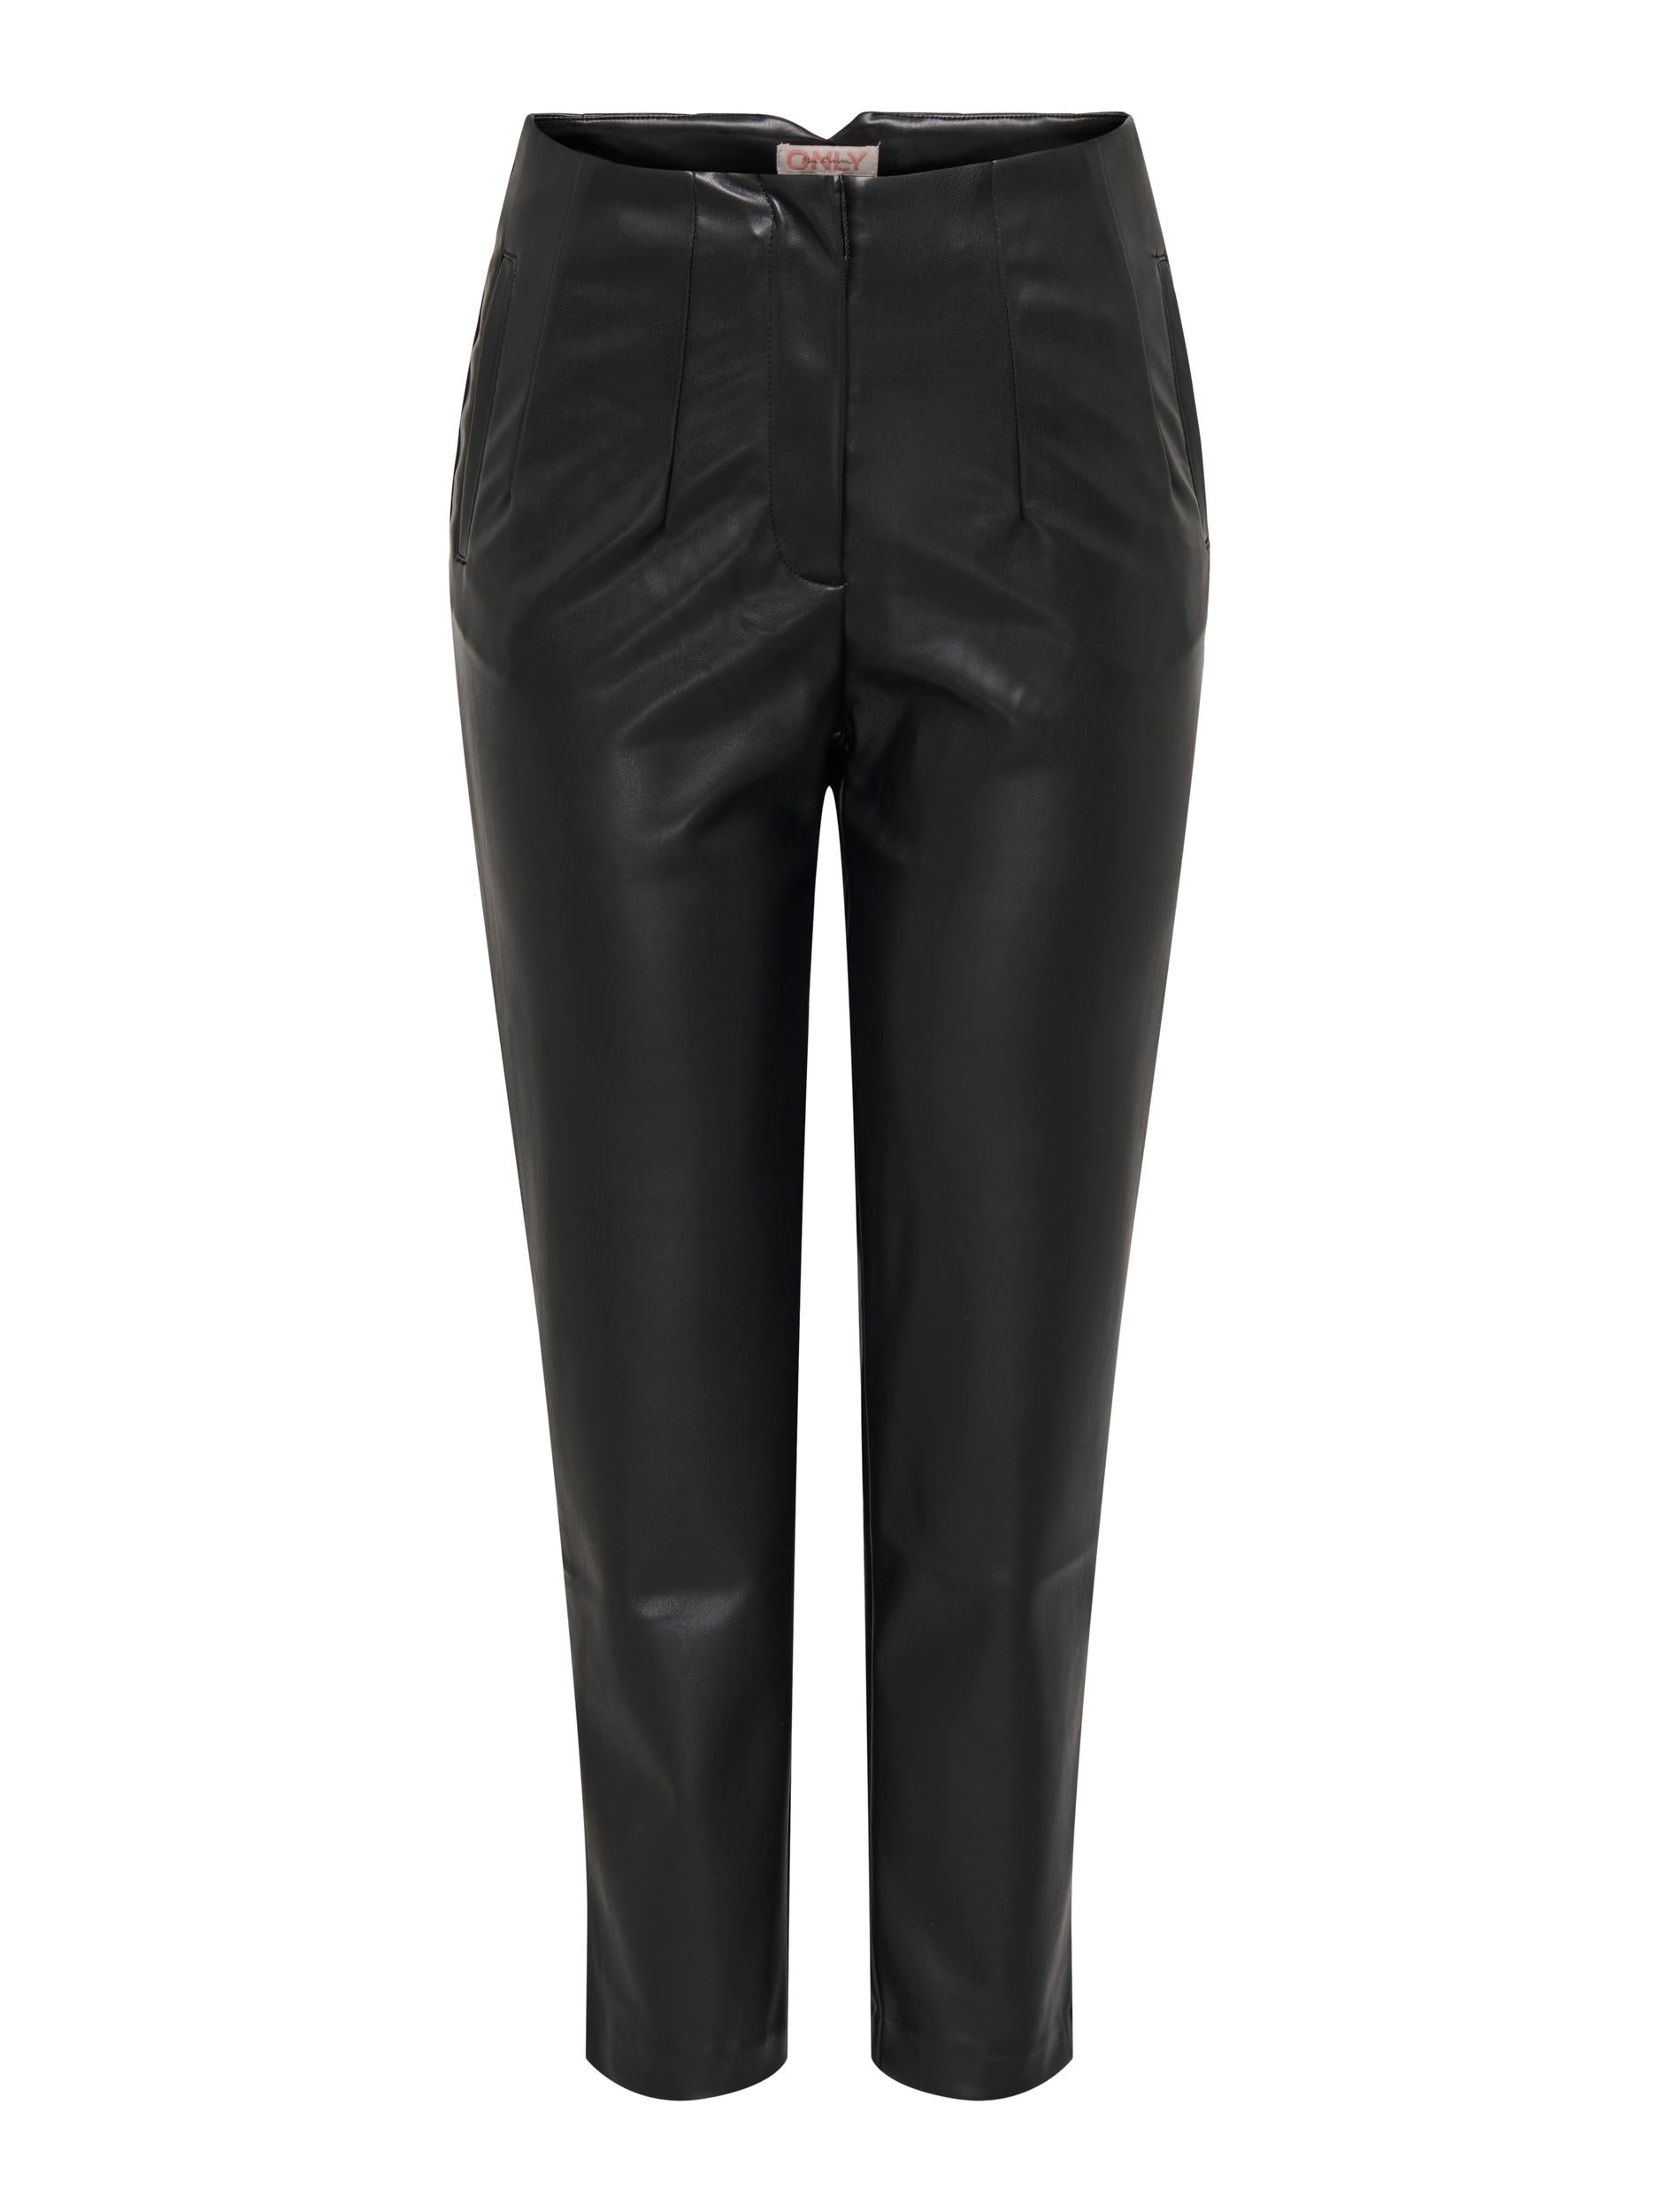 Ladies Raven Idina High Waist Faux Leather Pant-Black-Ghost Front View